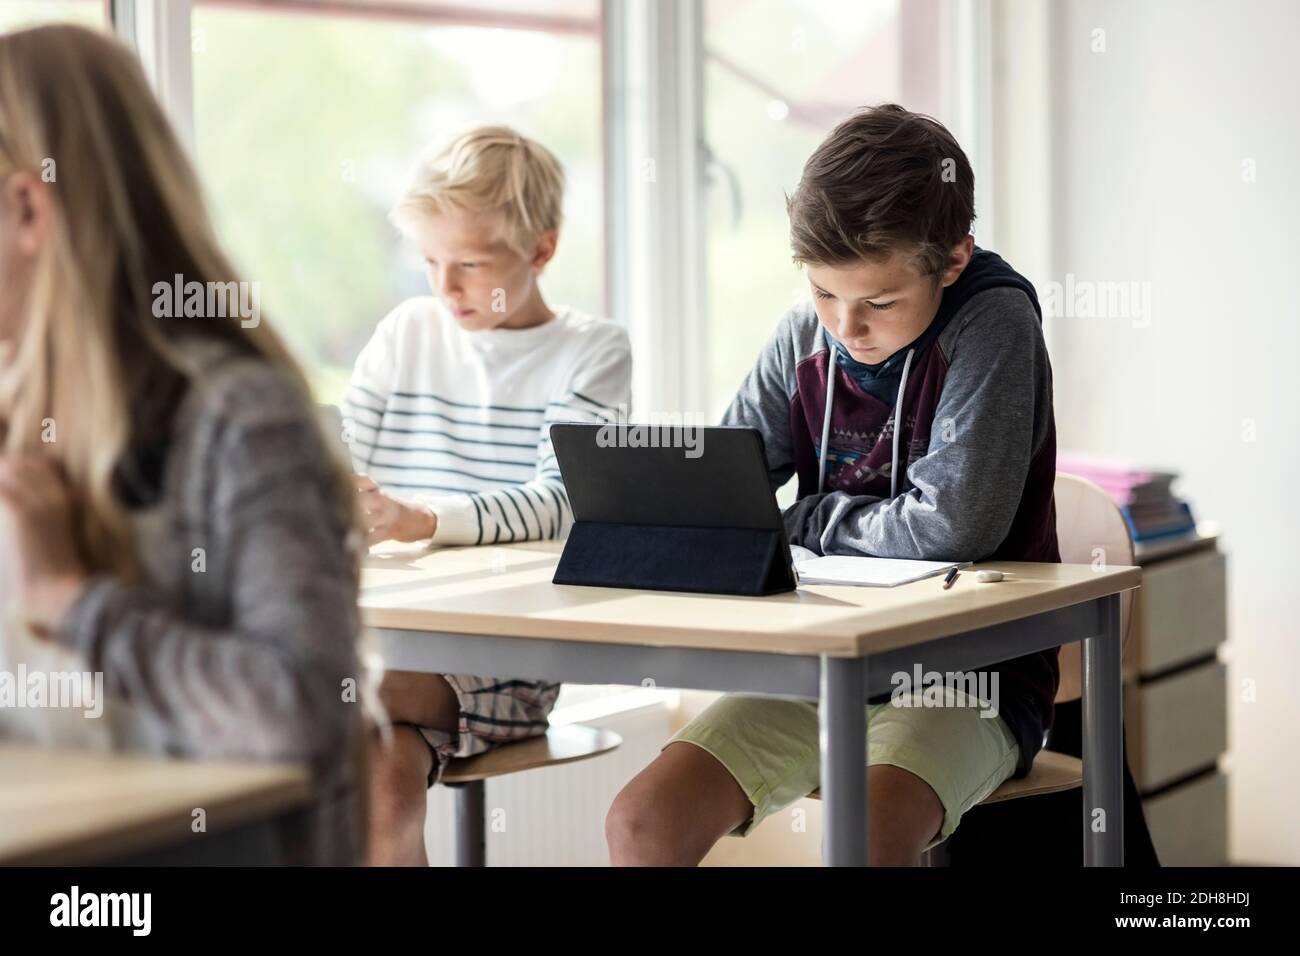 School children e-learning from digital tablet in classroom Stock Photo